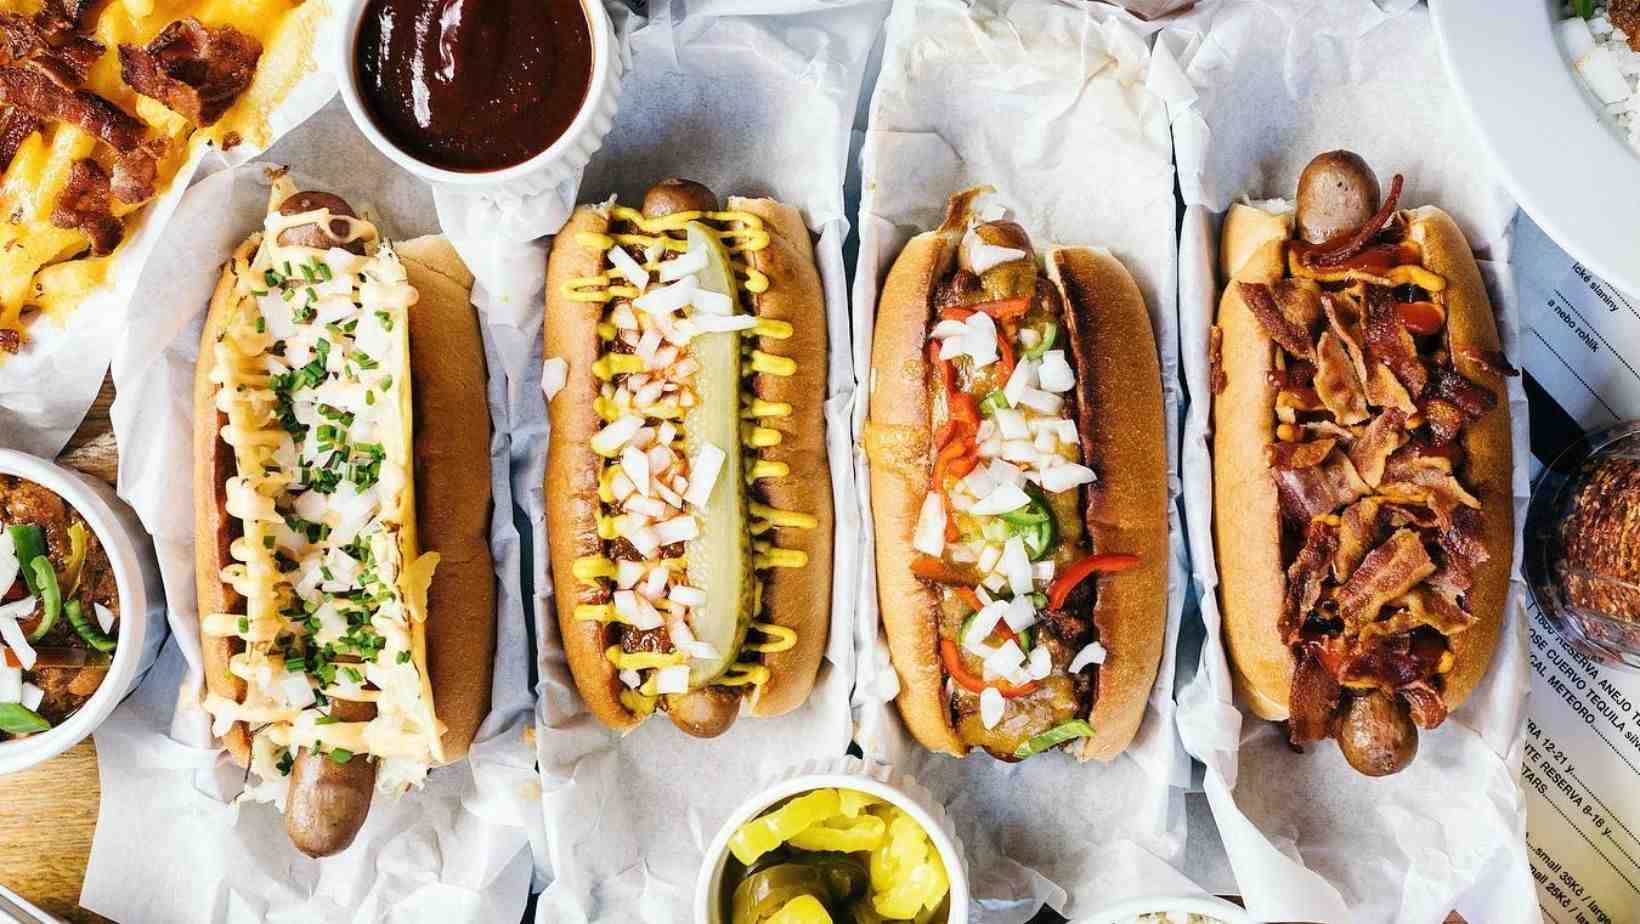 What's in all beef hot dogs?